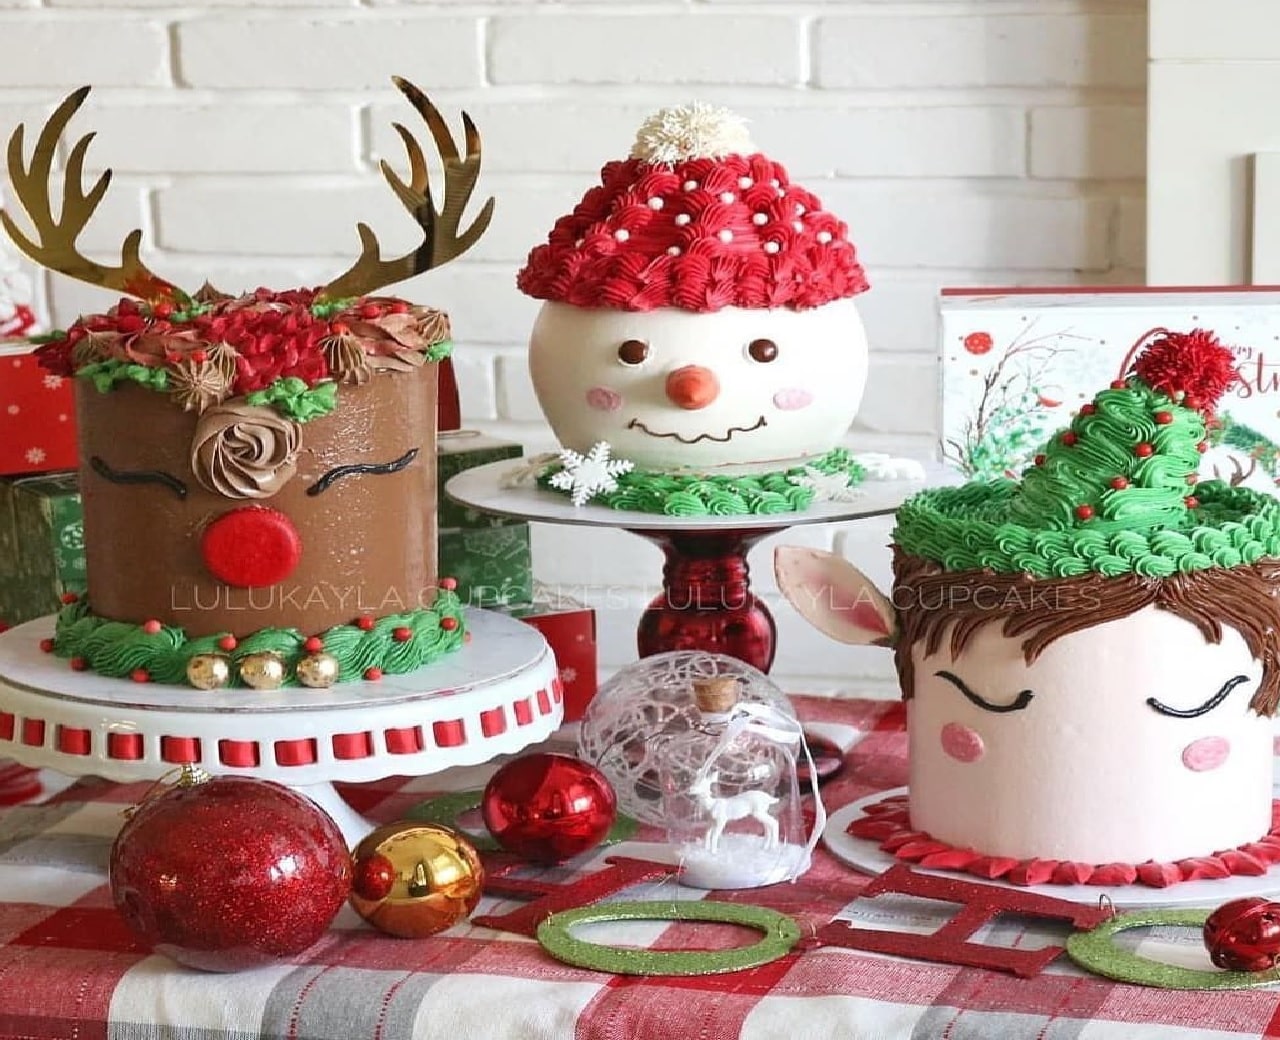 Christmas 2021: Here are 5 cake ideas to make the holidays even better!